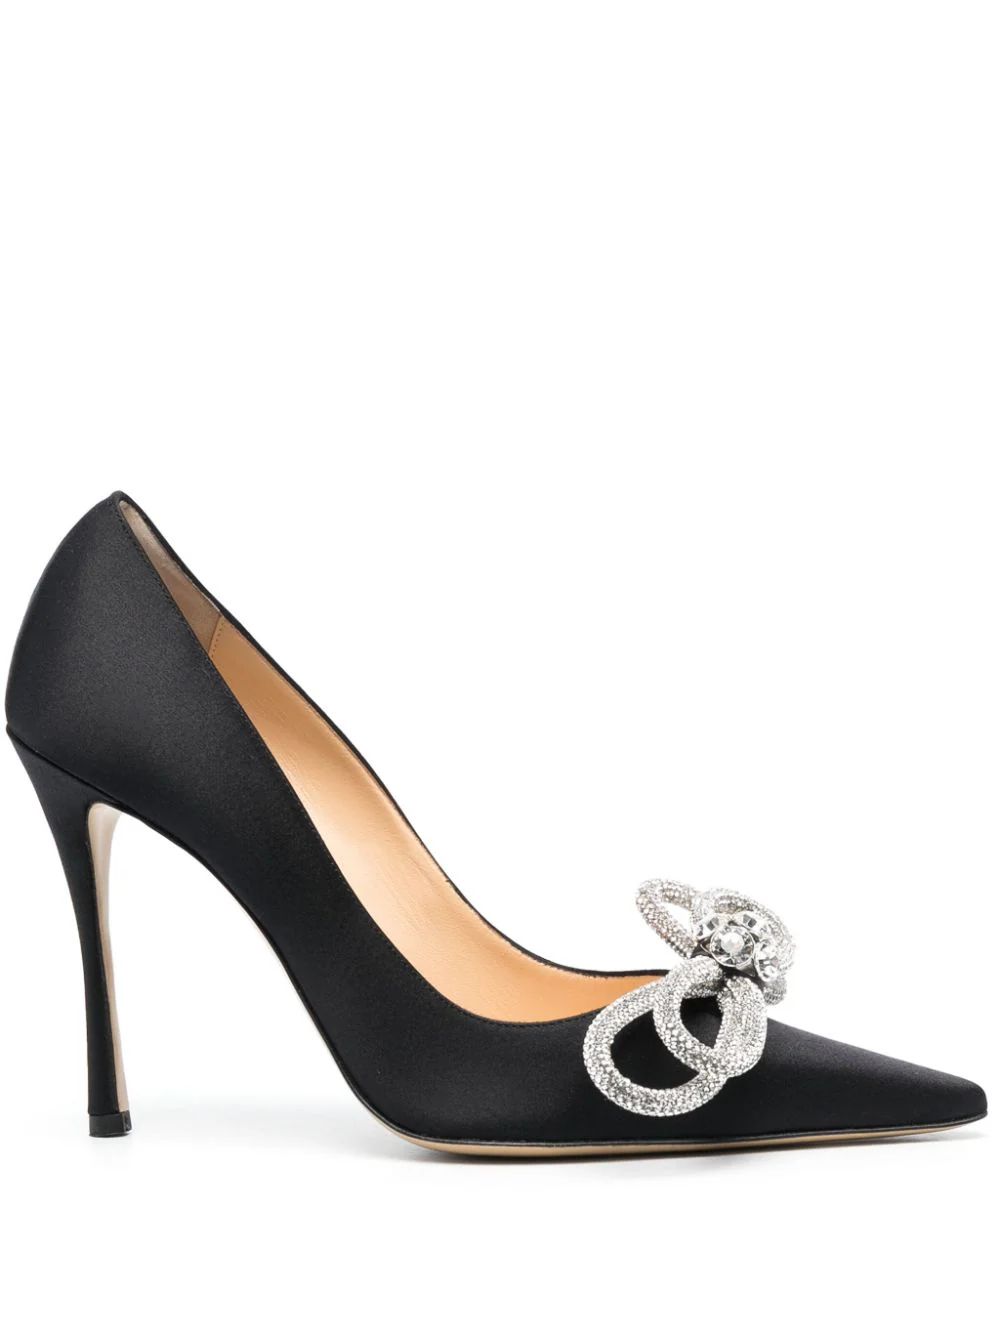 Double Bow 105mm satin pumps | Farfetch Global